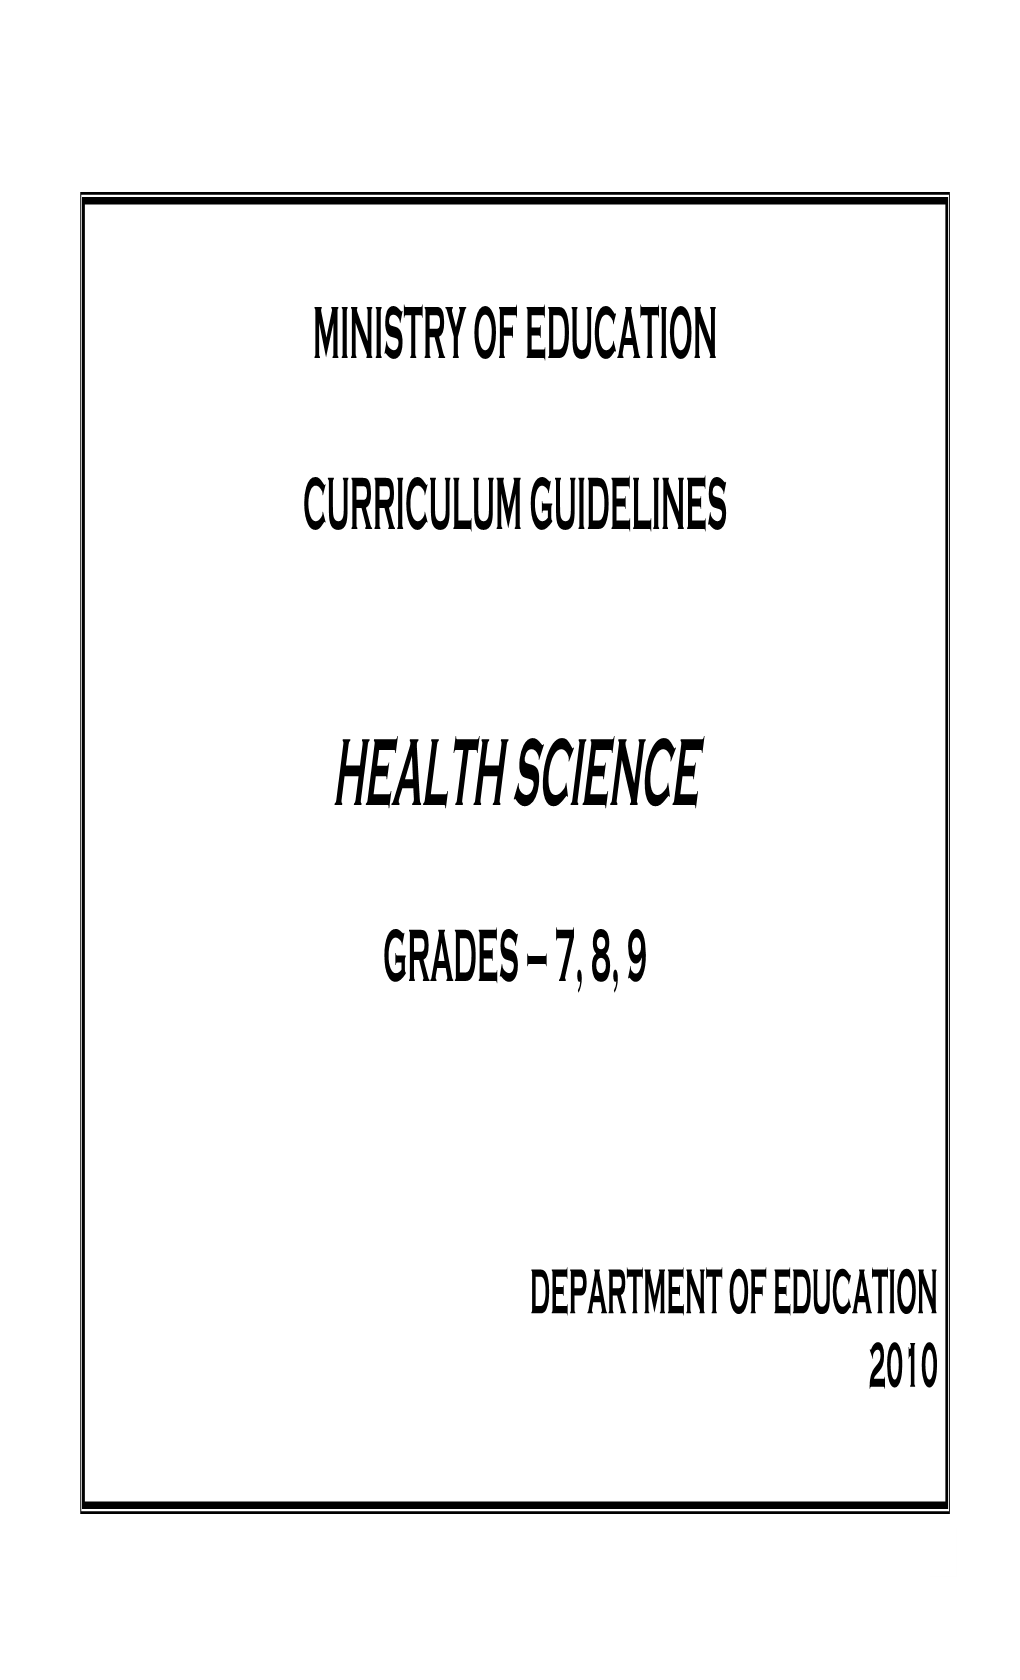 Health Science Curriculum Was Revised in 1982